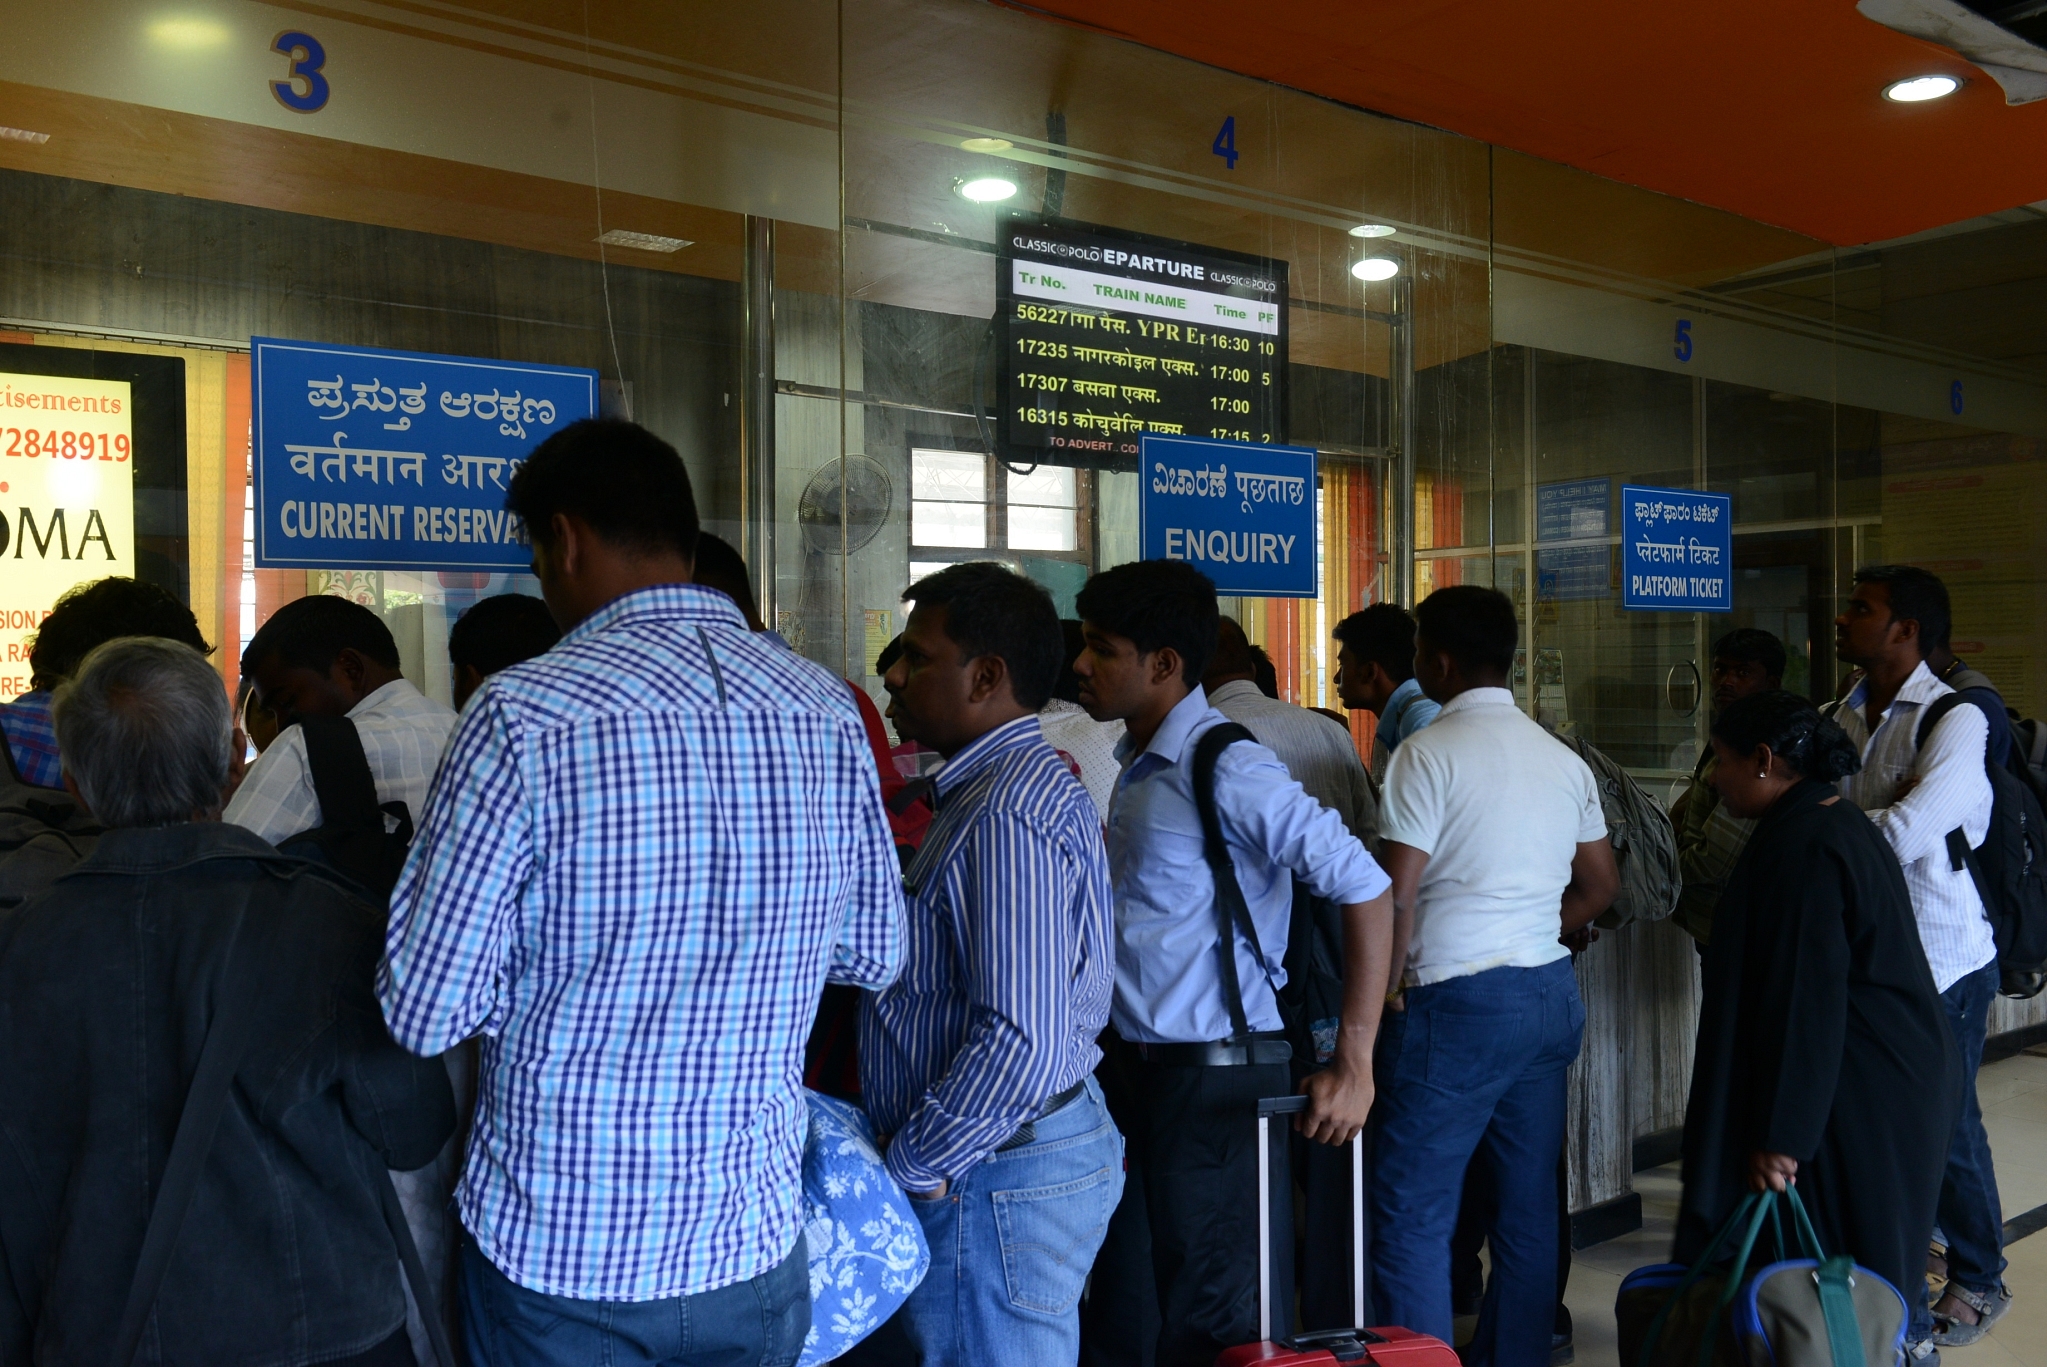 Users queing up to buy tickets at Krantivira Sangoli Rayanna Railway Station in Bengaluru (Hemant Mishra/Mint via Getty Images)&nbsp;